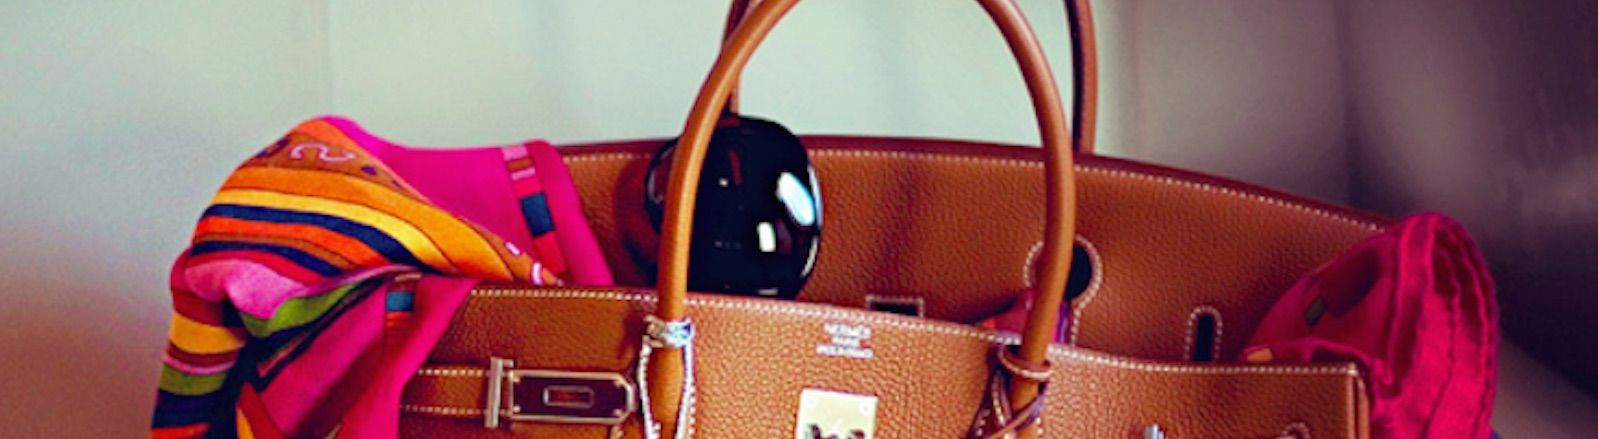 Rally and Prive Porter Are Offering 'Stock' in Rare Hermès Birkin Bags